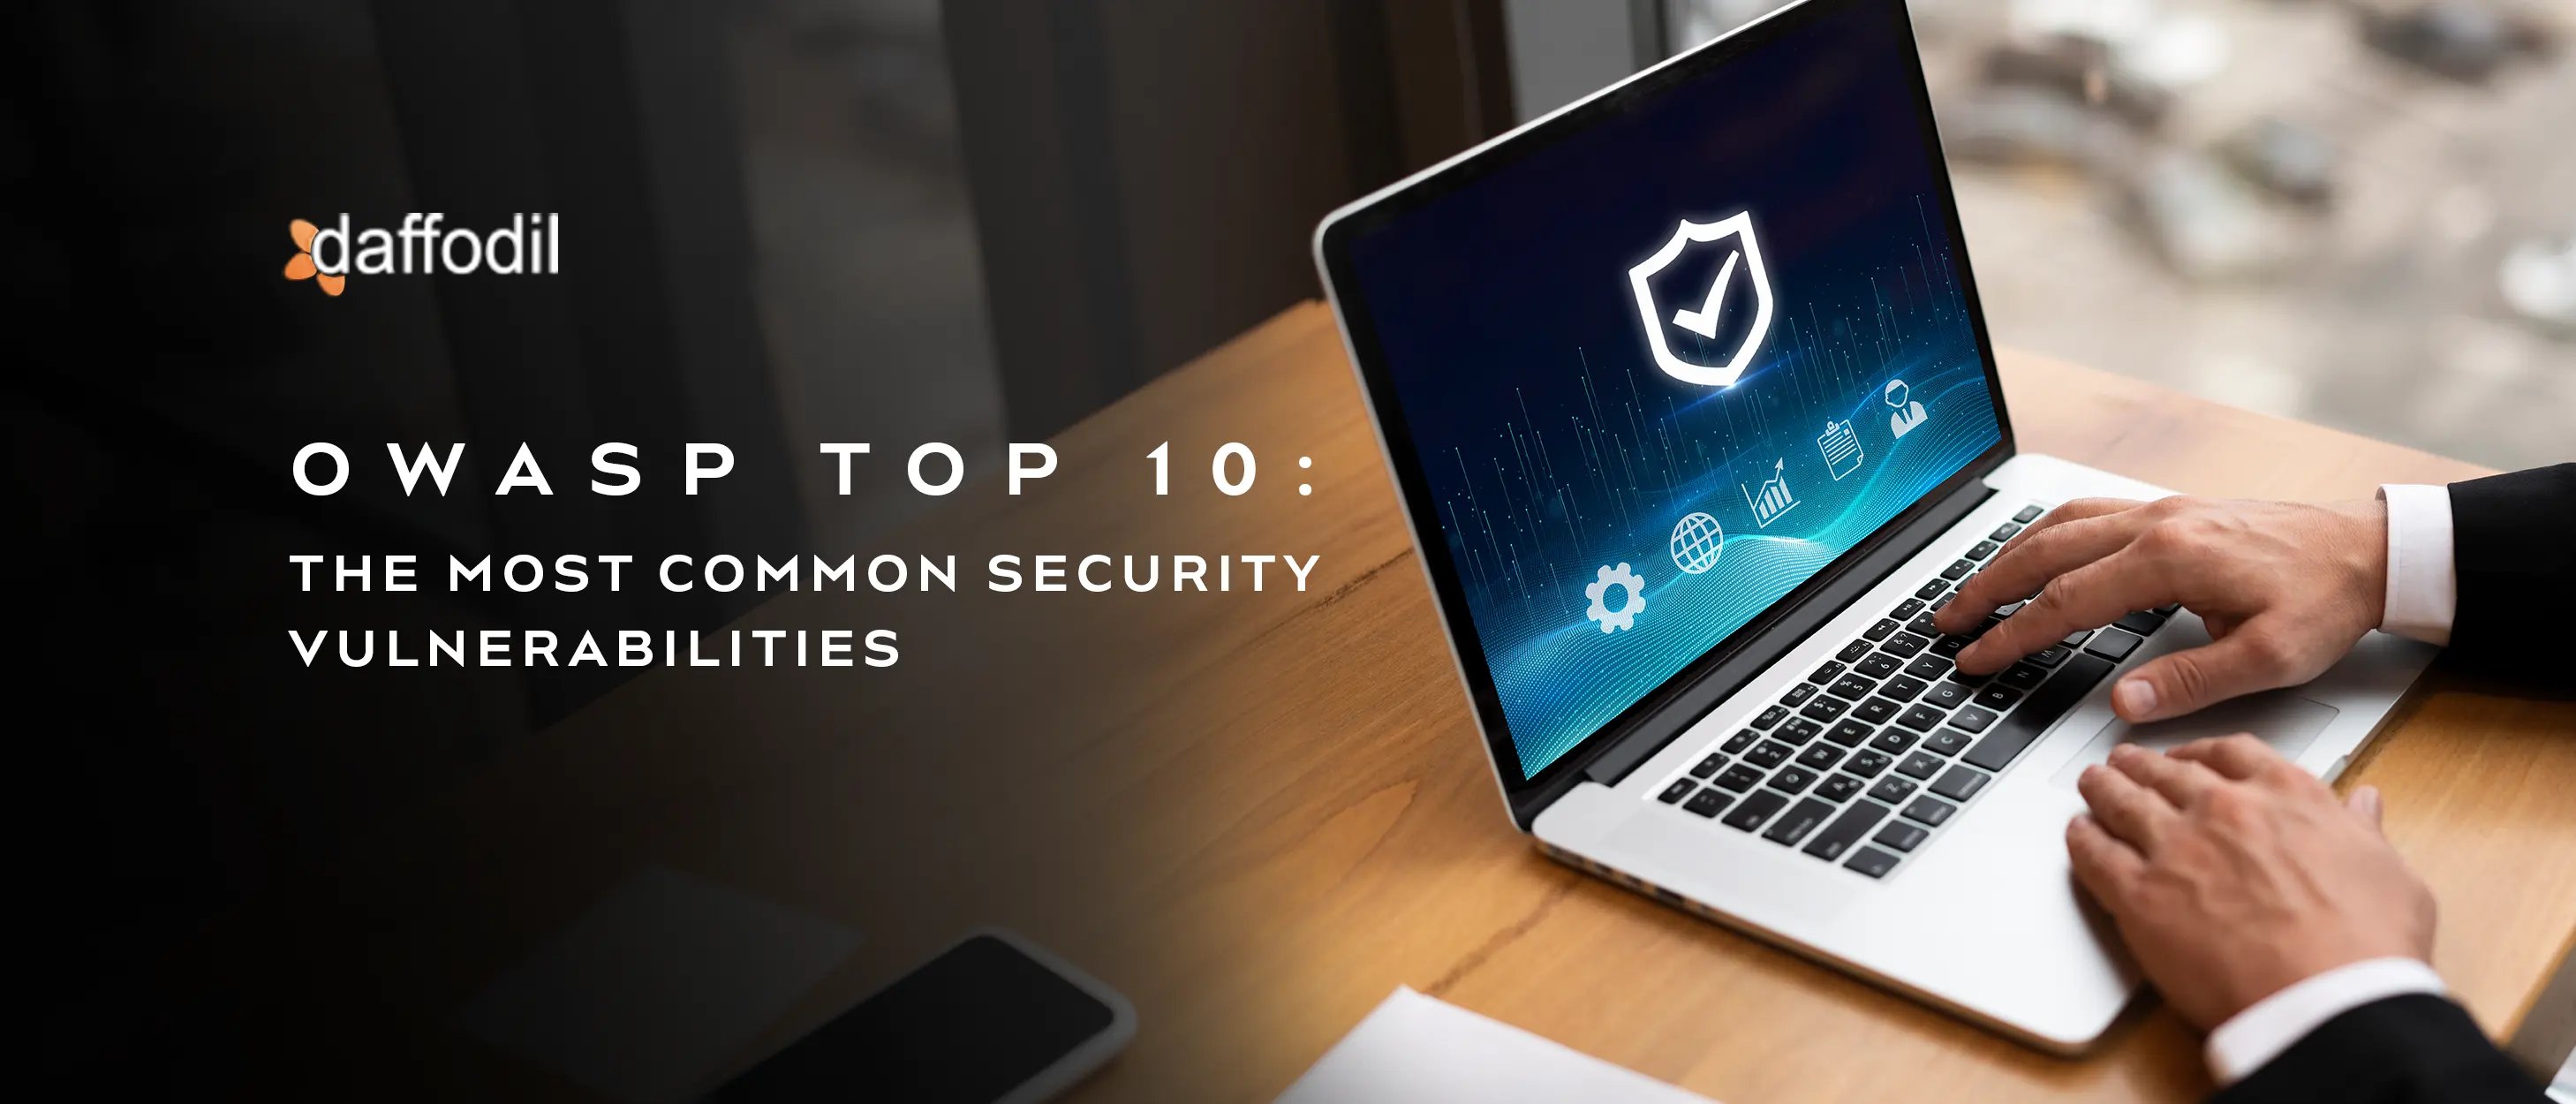 OWASP Top 10: The Most Common Security Vulnerabilities